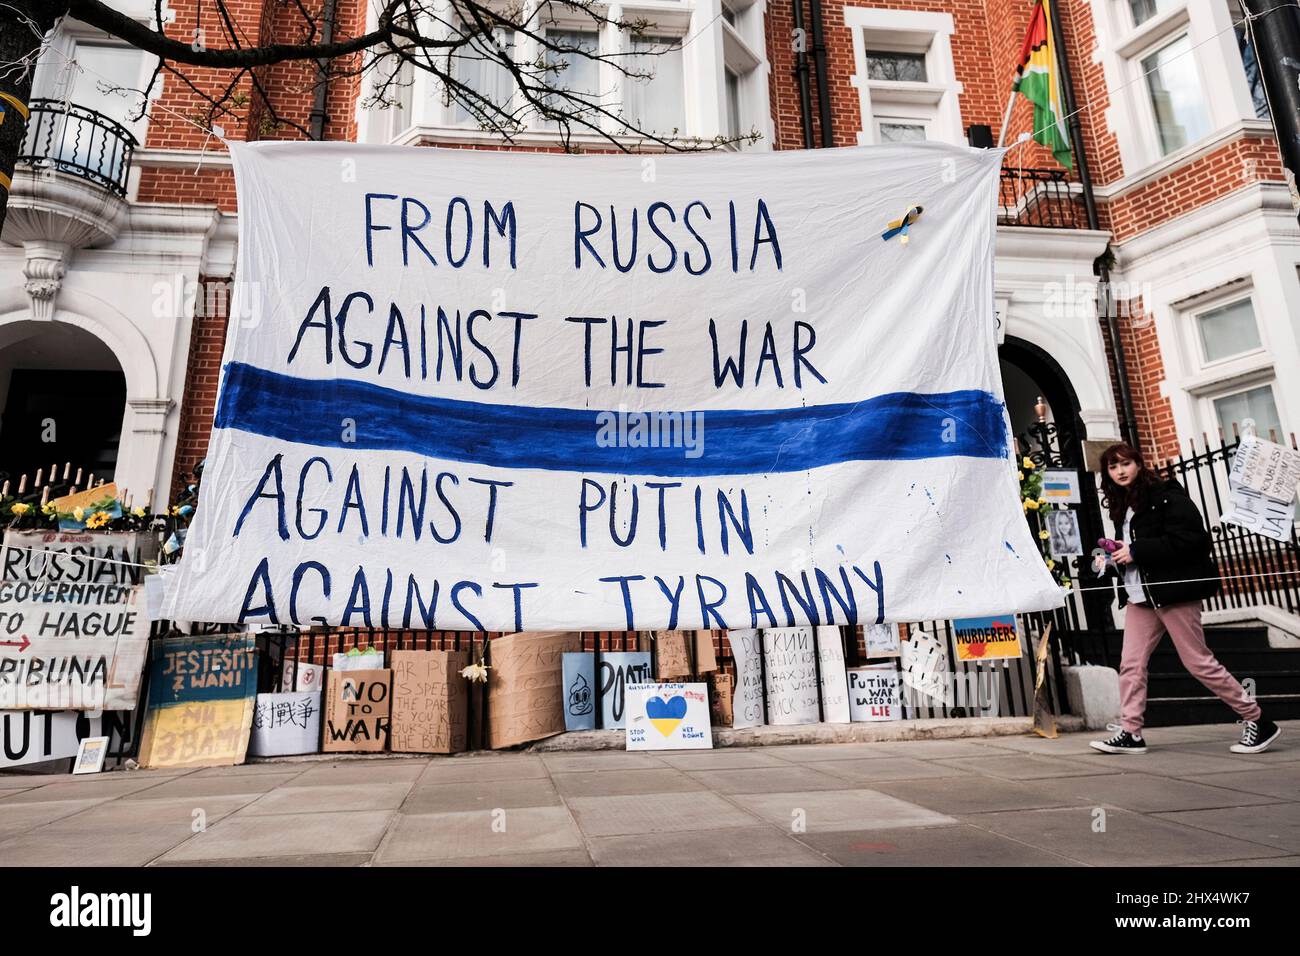 London UK, 9th March 2022. A banner declaring opposition to the war from Russian citizens is displayed opposite the Russian Embassy. The Russians Against War movement has adopted a white and blue flag as a symbol of their protest.The flag replaces the red stripe of the Russian flag to remove the association with blood and violence, along with military power and authoritarianism. It also references the historic flag of Veliky Novgorod, where the government of the Novgorod Republic had a reputation for developing democratic governance. Stock Photo